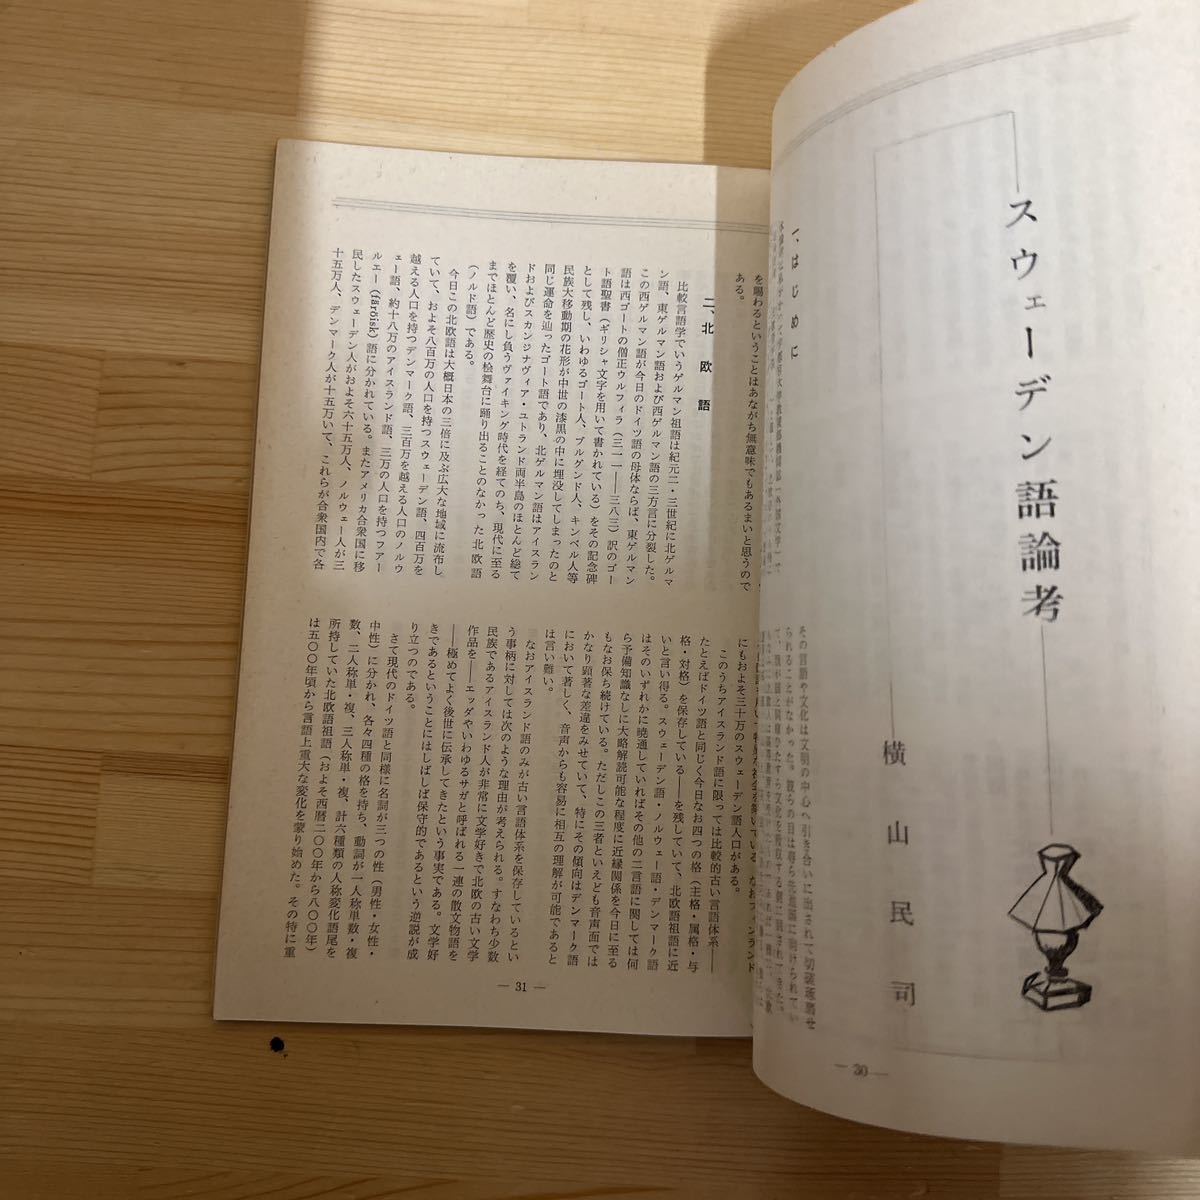 A11E2-230415 レア［北欧 創刊号～20巻 まとめて20冊揃い 1972年～1978年 北欧文化通信社］スウェーデンについての画像5